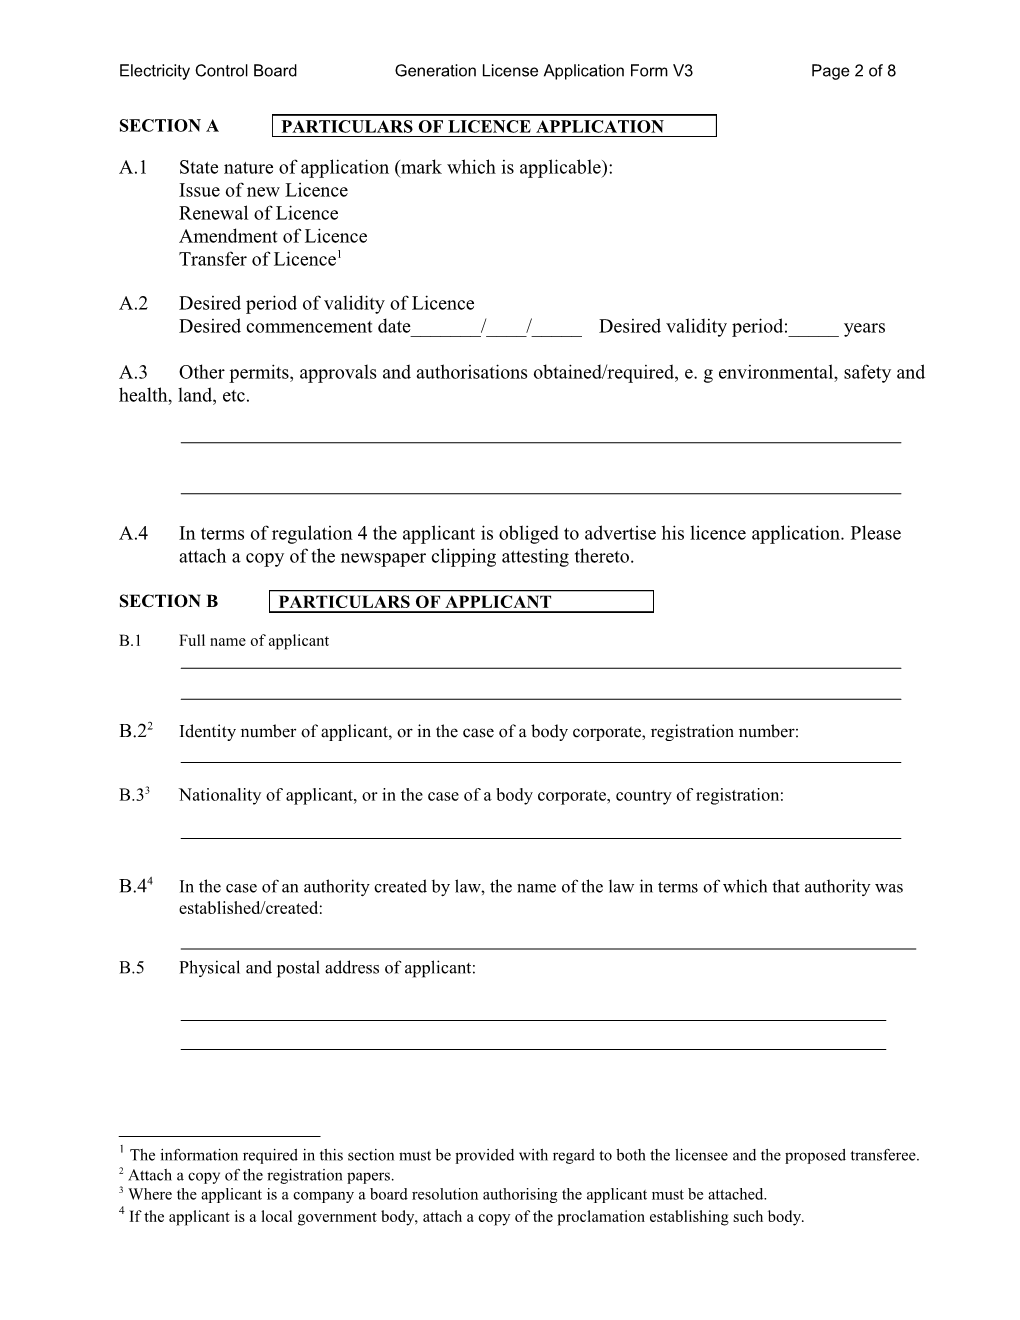 Electricity Control Boardgeneration License Application Form V3page 1 of 8